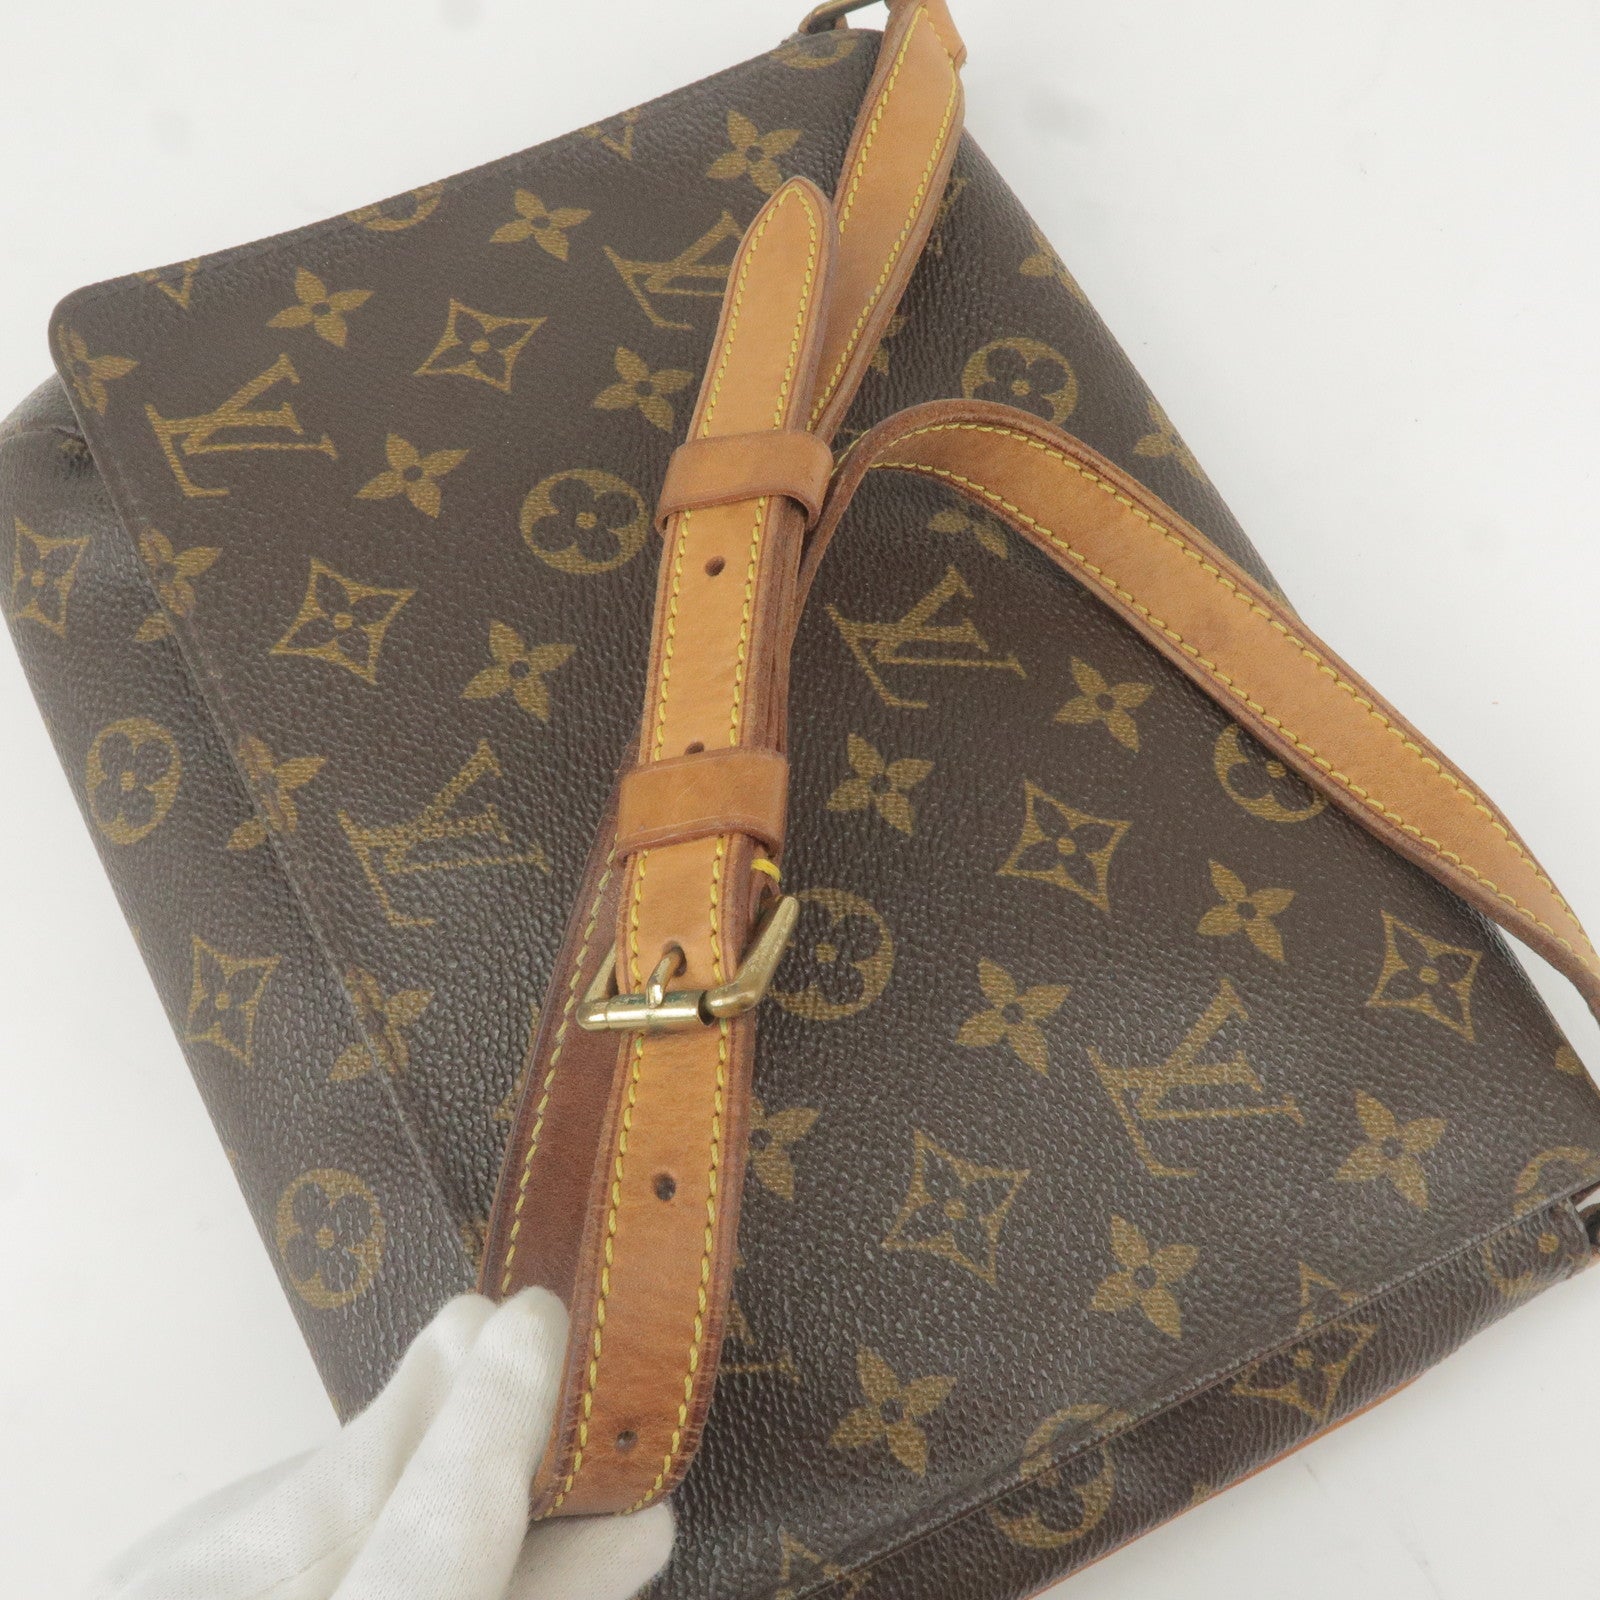 Louis Vuitton Monogram Clutch Blue in Calfskin Leather with Gold